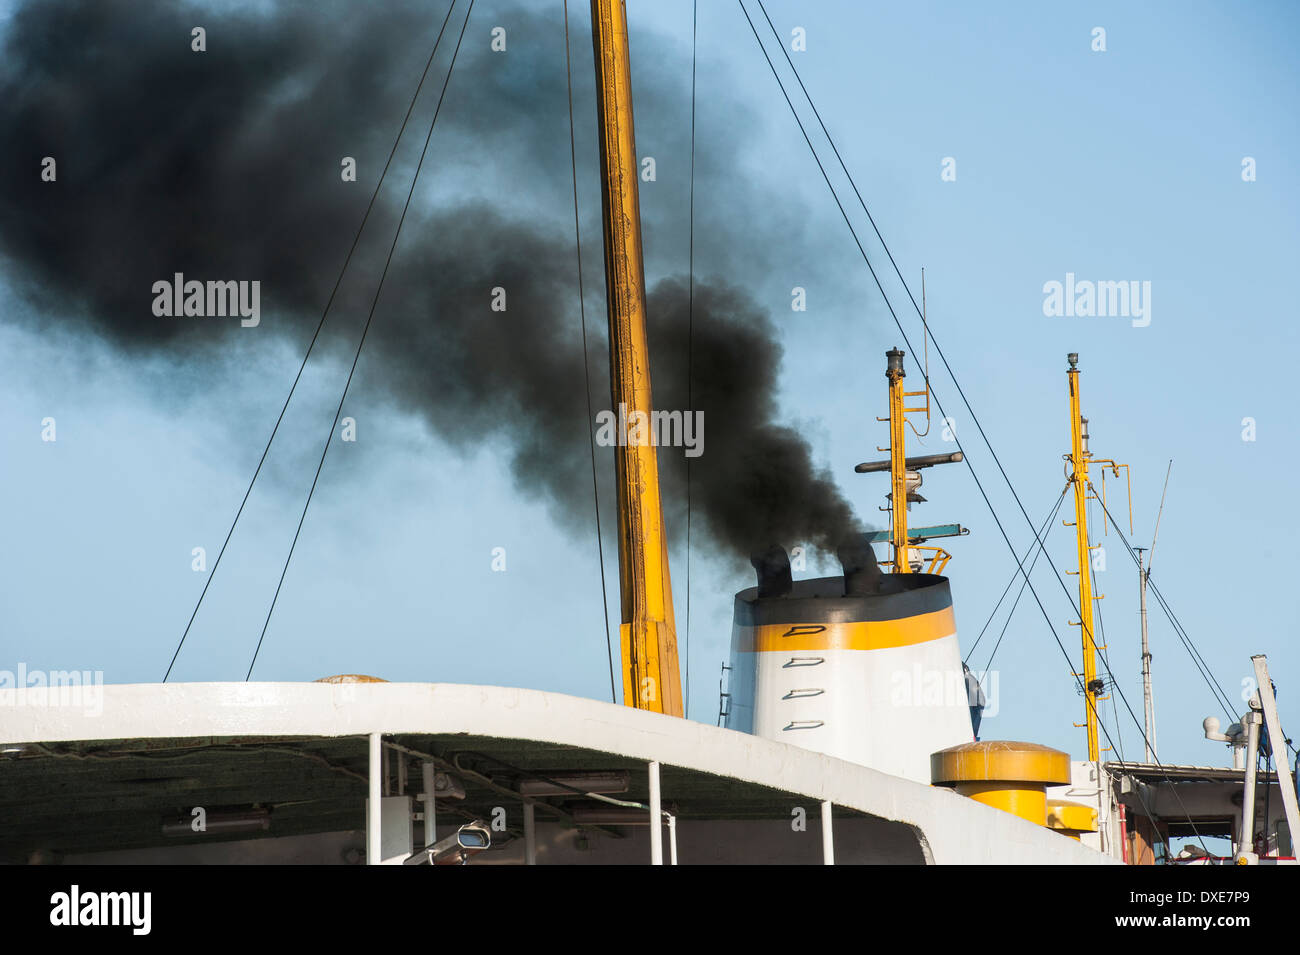 Black exhaust smoke coming from ship smoke stack funnel air pollution concept Stock Photo